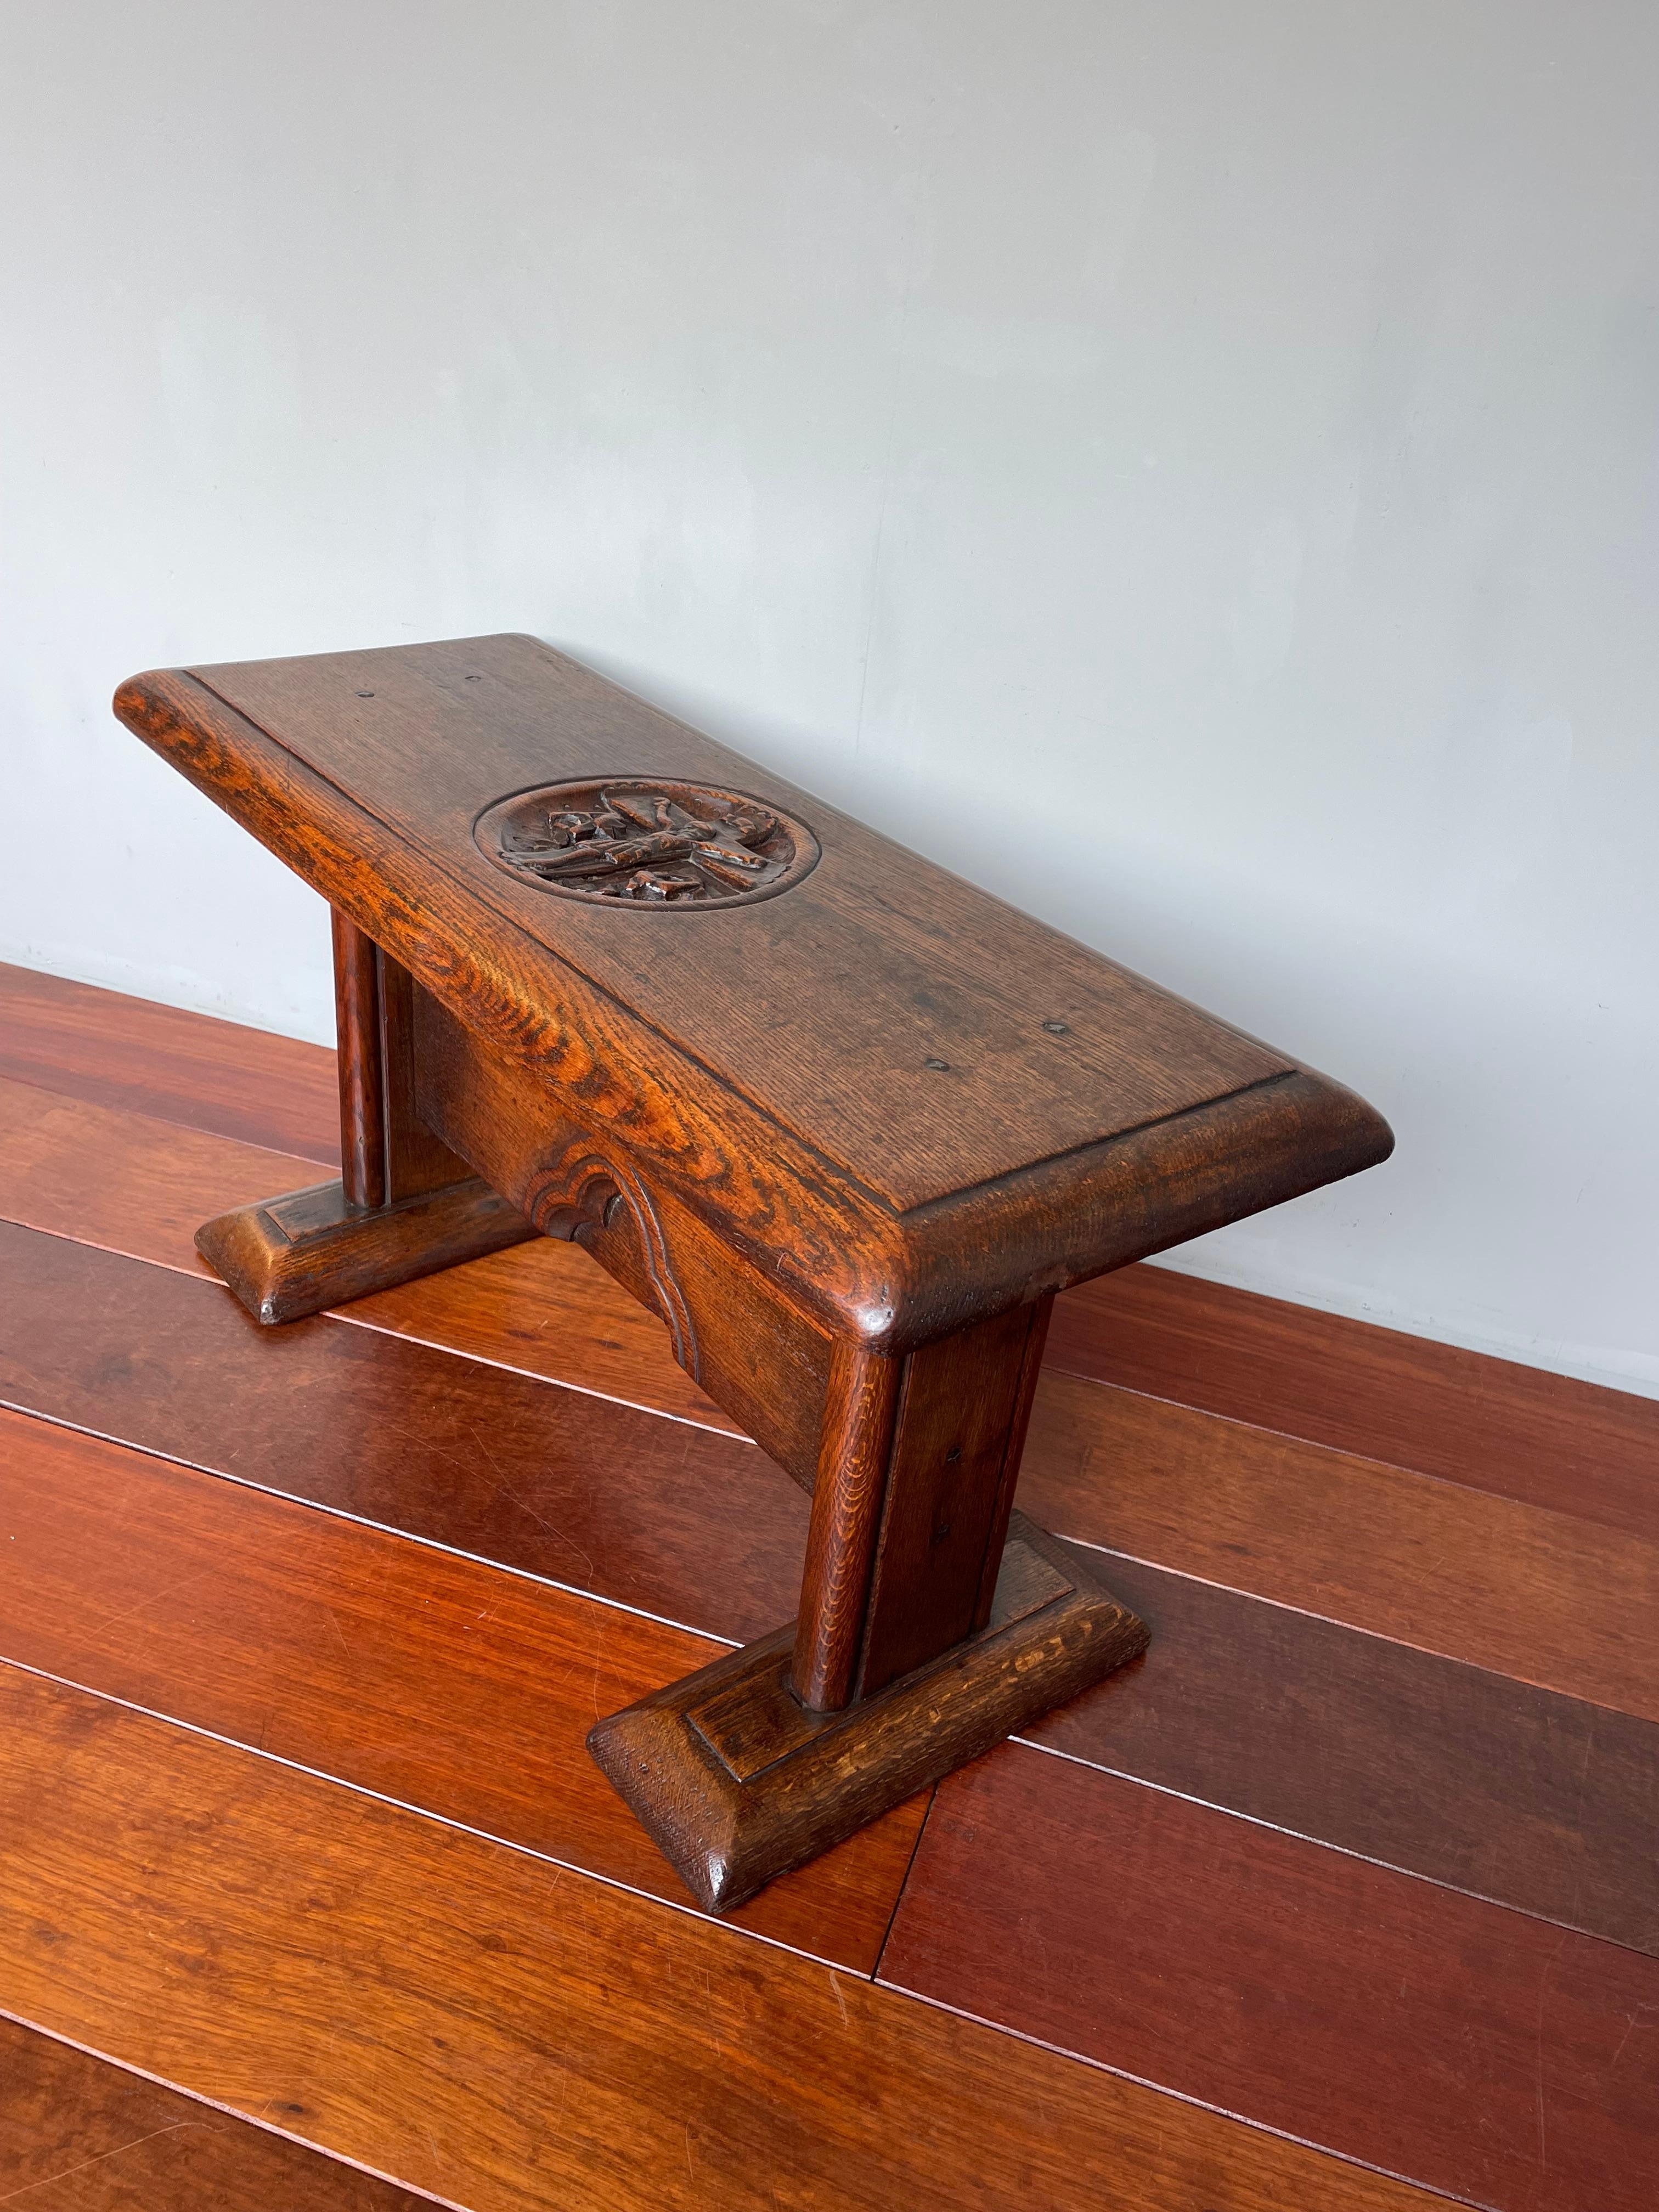 Gothic Revival Stool / Bench with Hand Carved Christ on Crucifix Sculpture 1800s For Sale 9